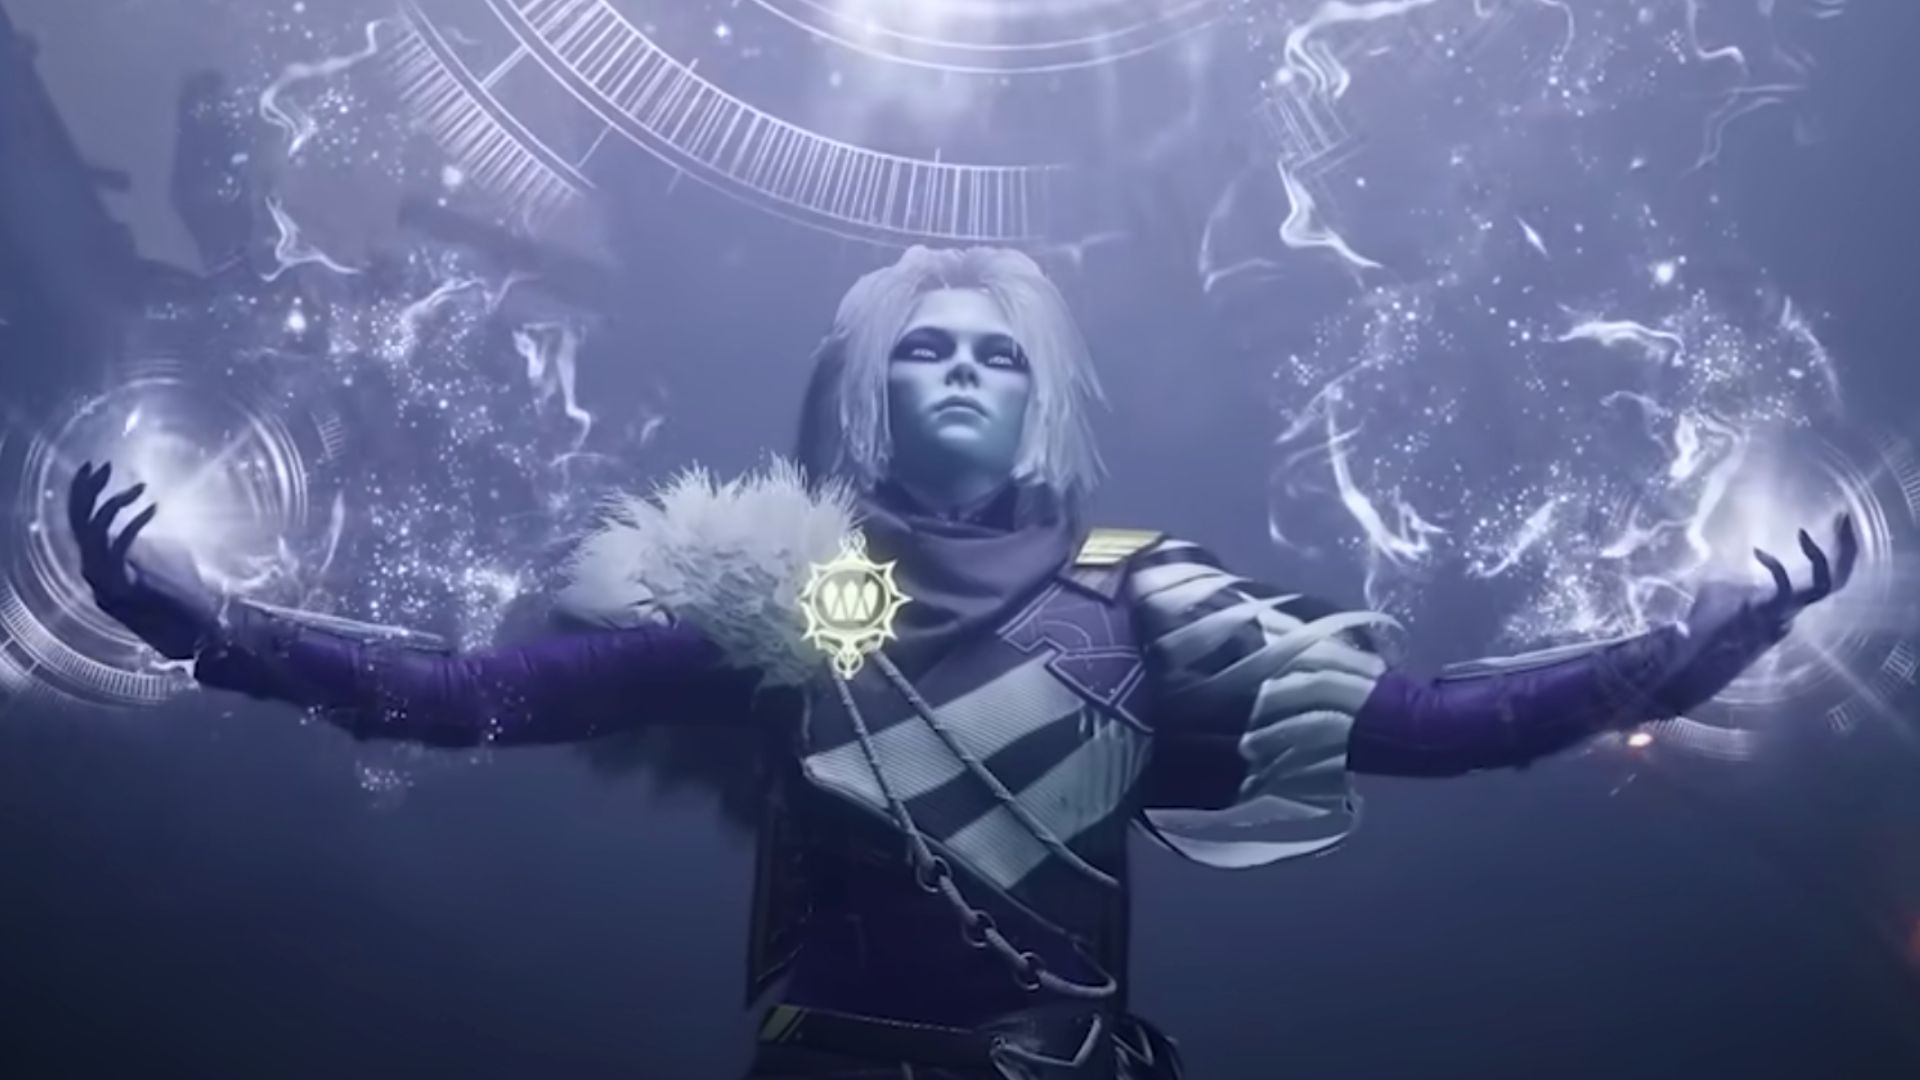 Destiny 2 streamer Datto schools players over game engine complaints